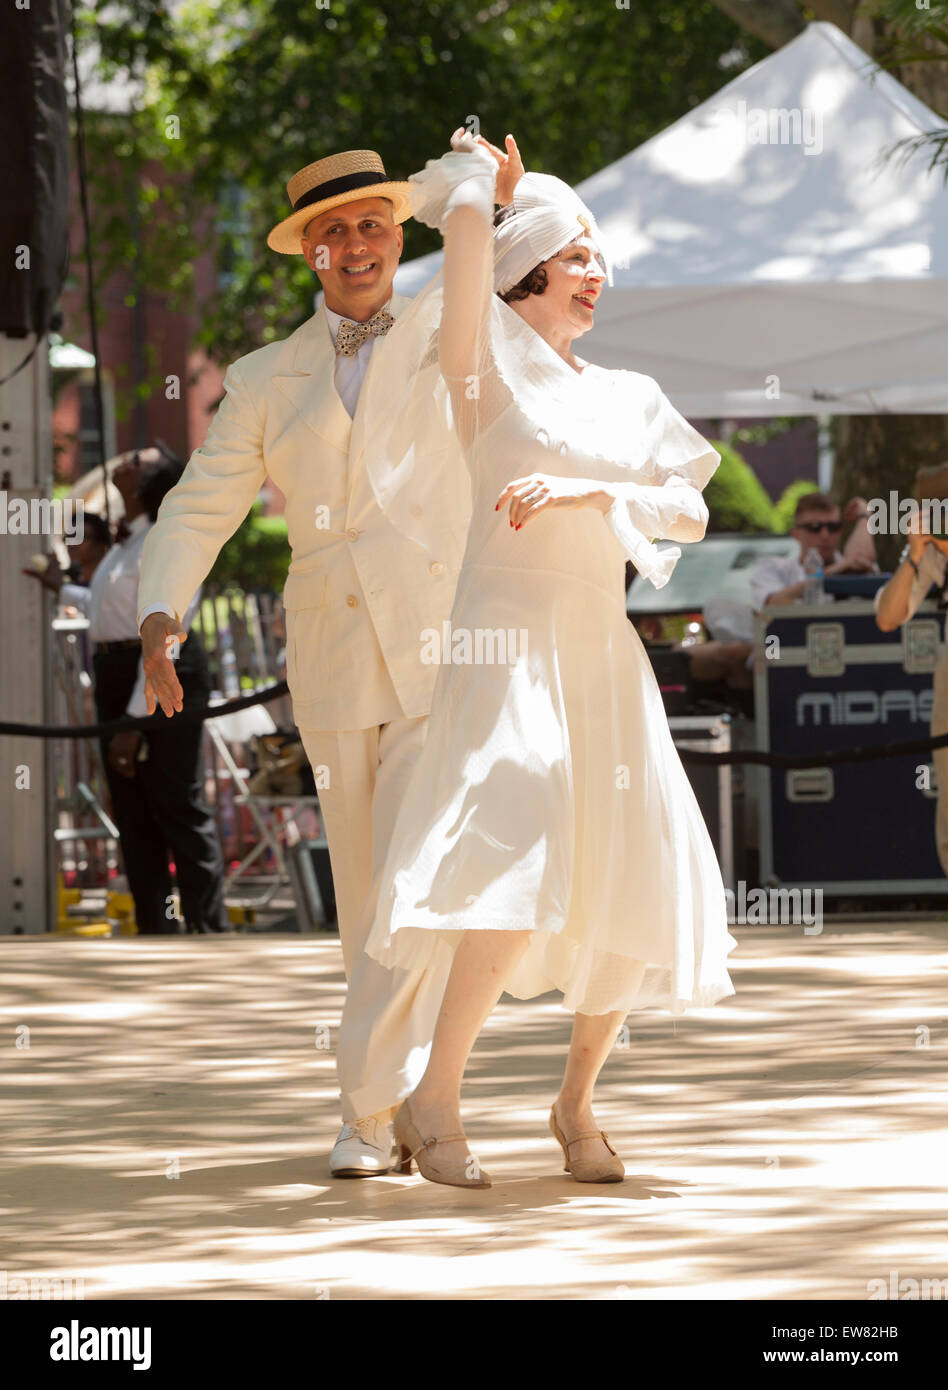 New York, NY - June 14, 2015: Rudy Caravella’s Canarsie Wobblers dance at 10th annual Jazz Age lawn party by Michael Arenella & Dreamland Orchestra on Governors Island Stock Photo